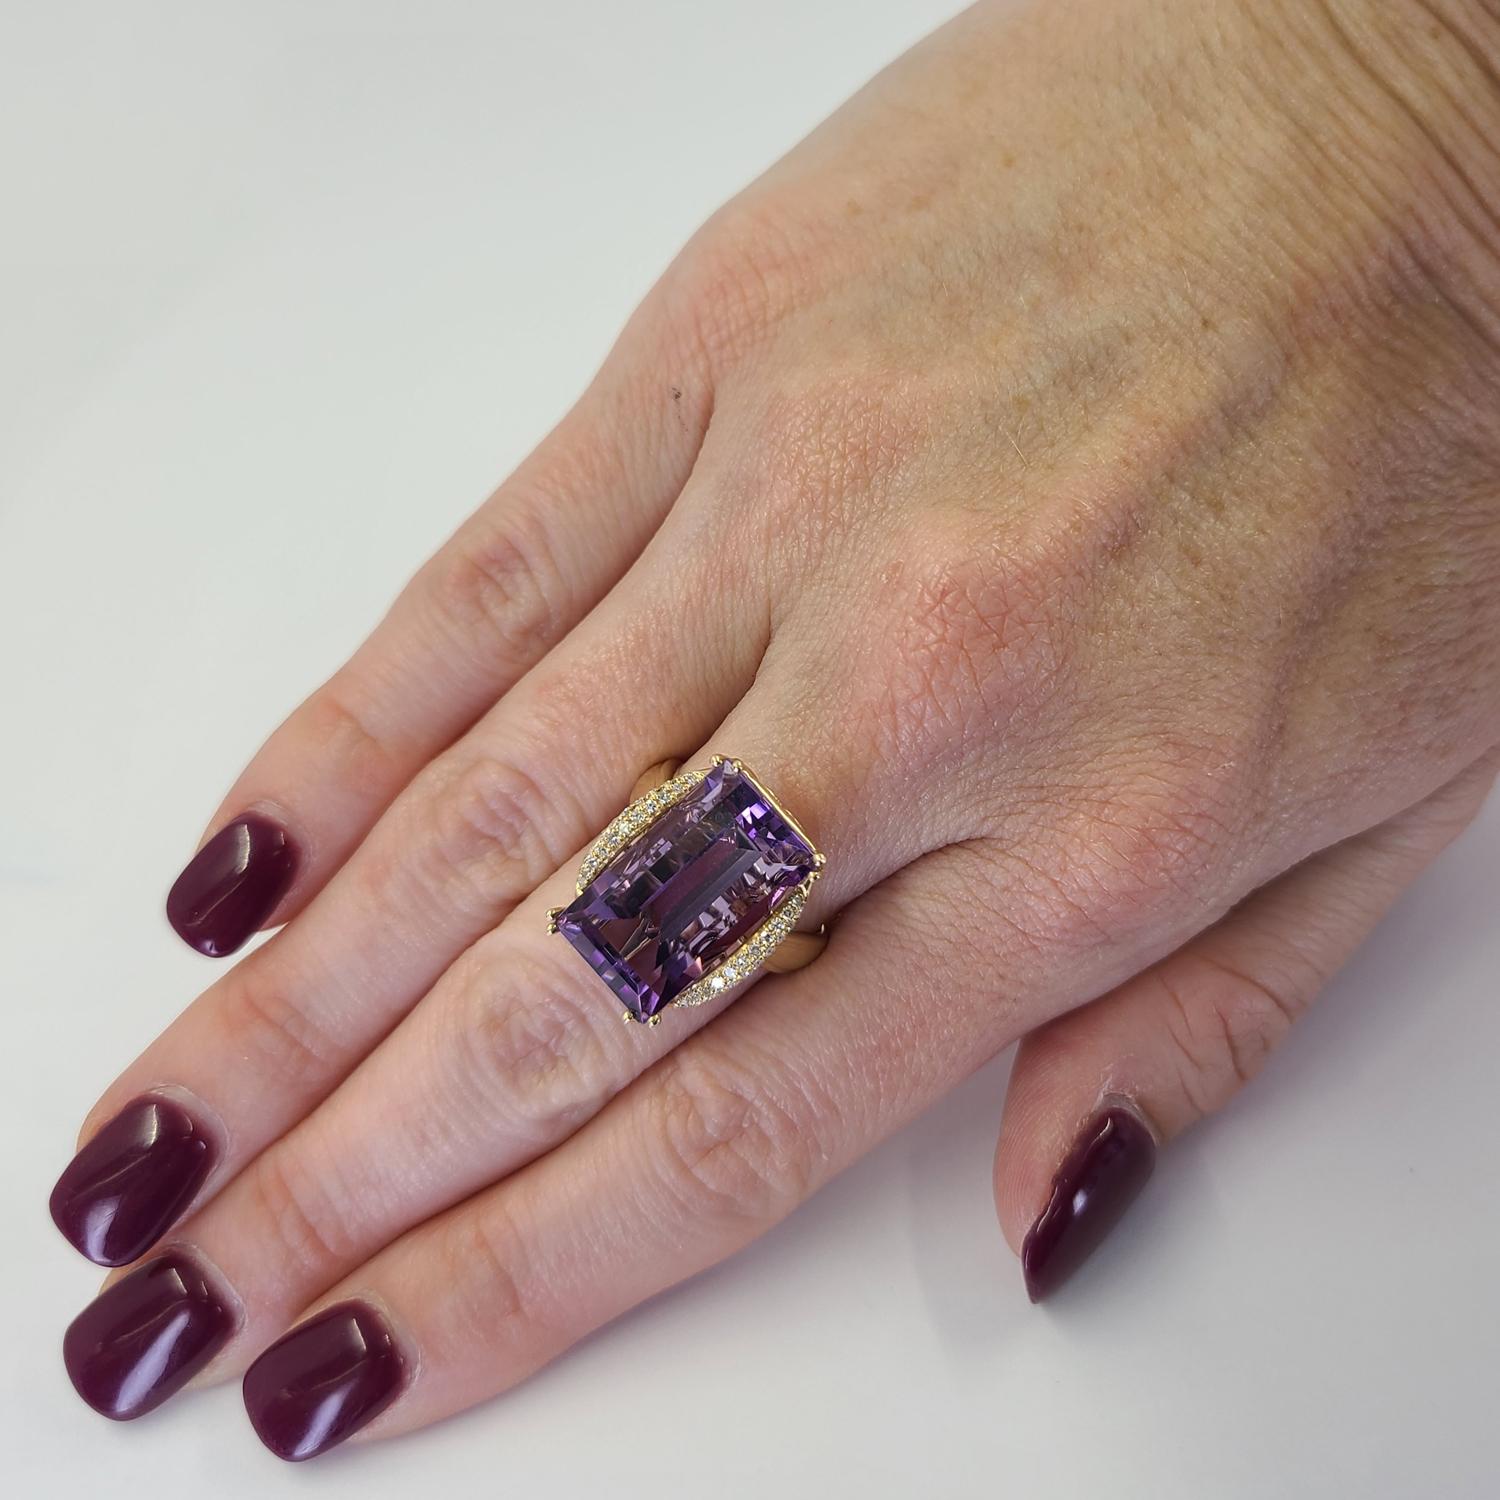 14 Karat Yellow Gold Cocktail Ring Featuring A 10 Carat Baguette Cut Amethyst Accented By 22 Single Cut Diamonds of SI Clarity and G/H Color Totaling 0.11 Carats. Detailed Side Gallery. Finger Size 6.5; Purchase Includes One Sizing Service. Finished